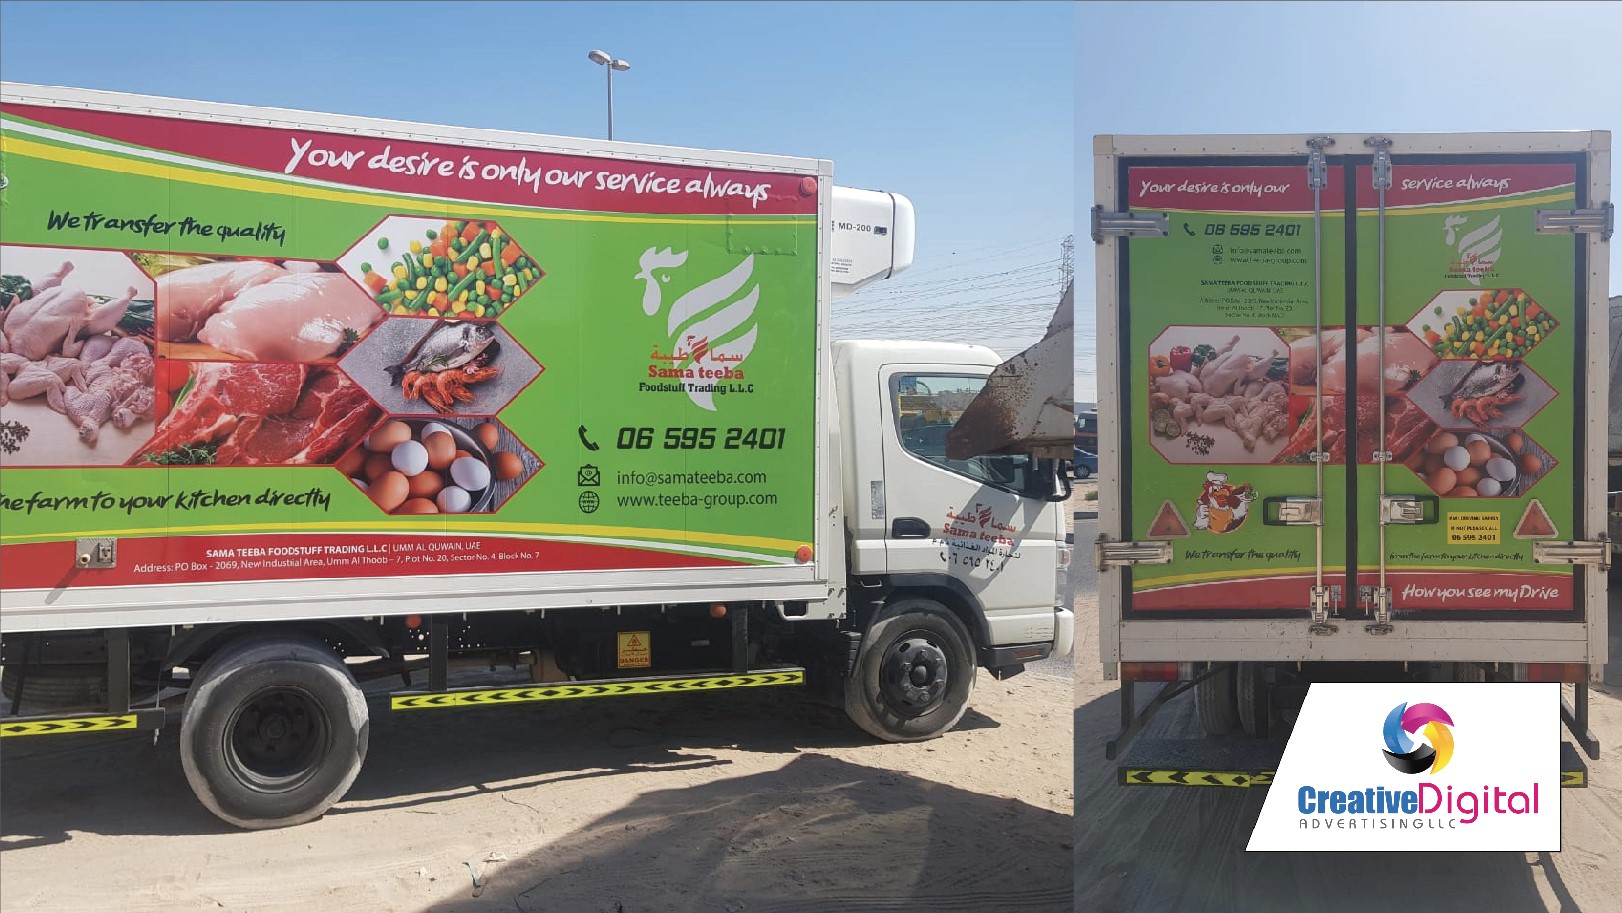 Creative Digital – Your One-Stop Destination for Roll-Up Banner Design and Car Branding in Dubai